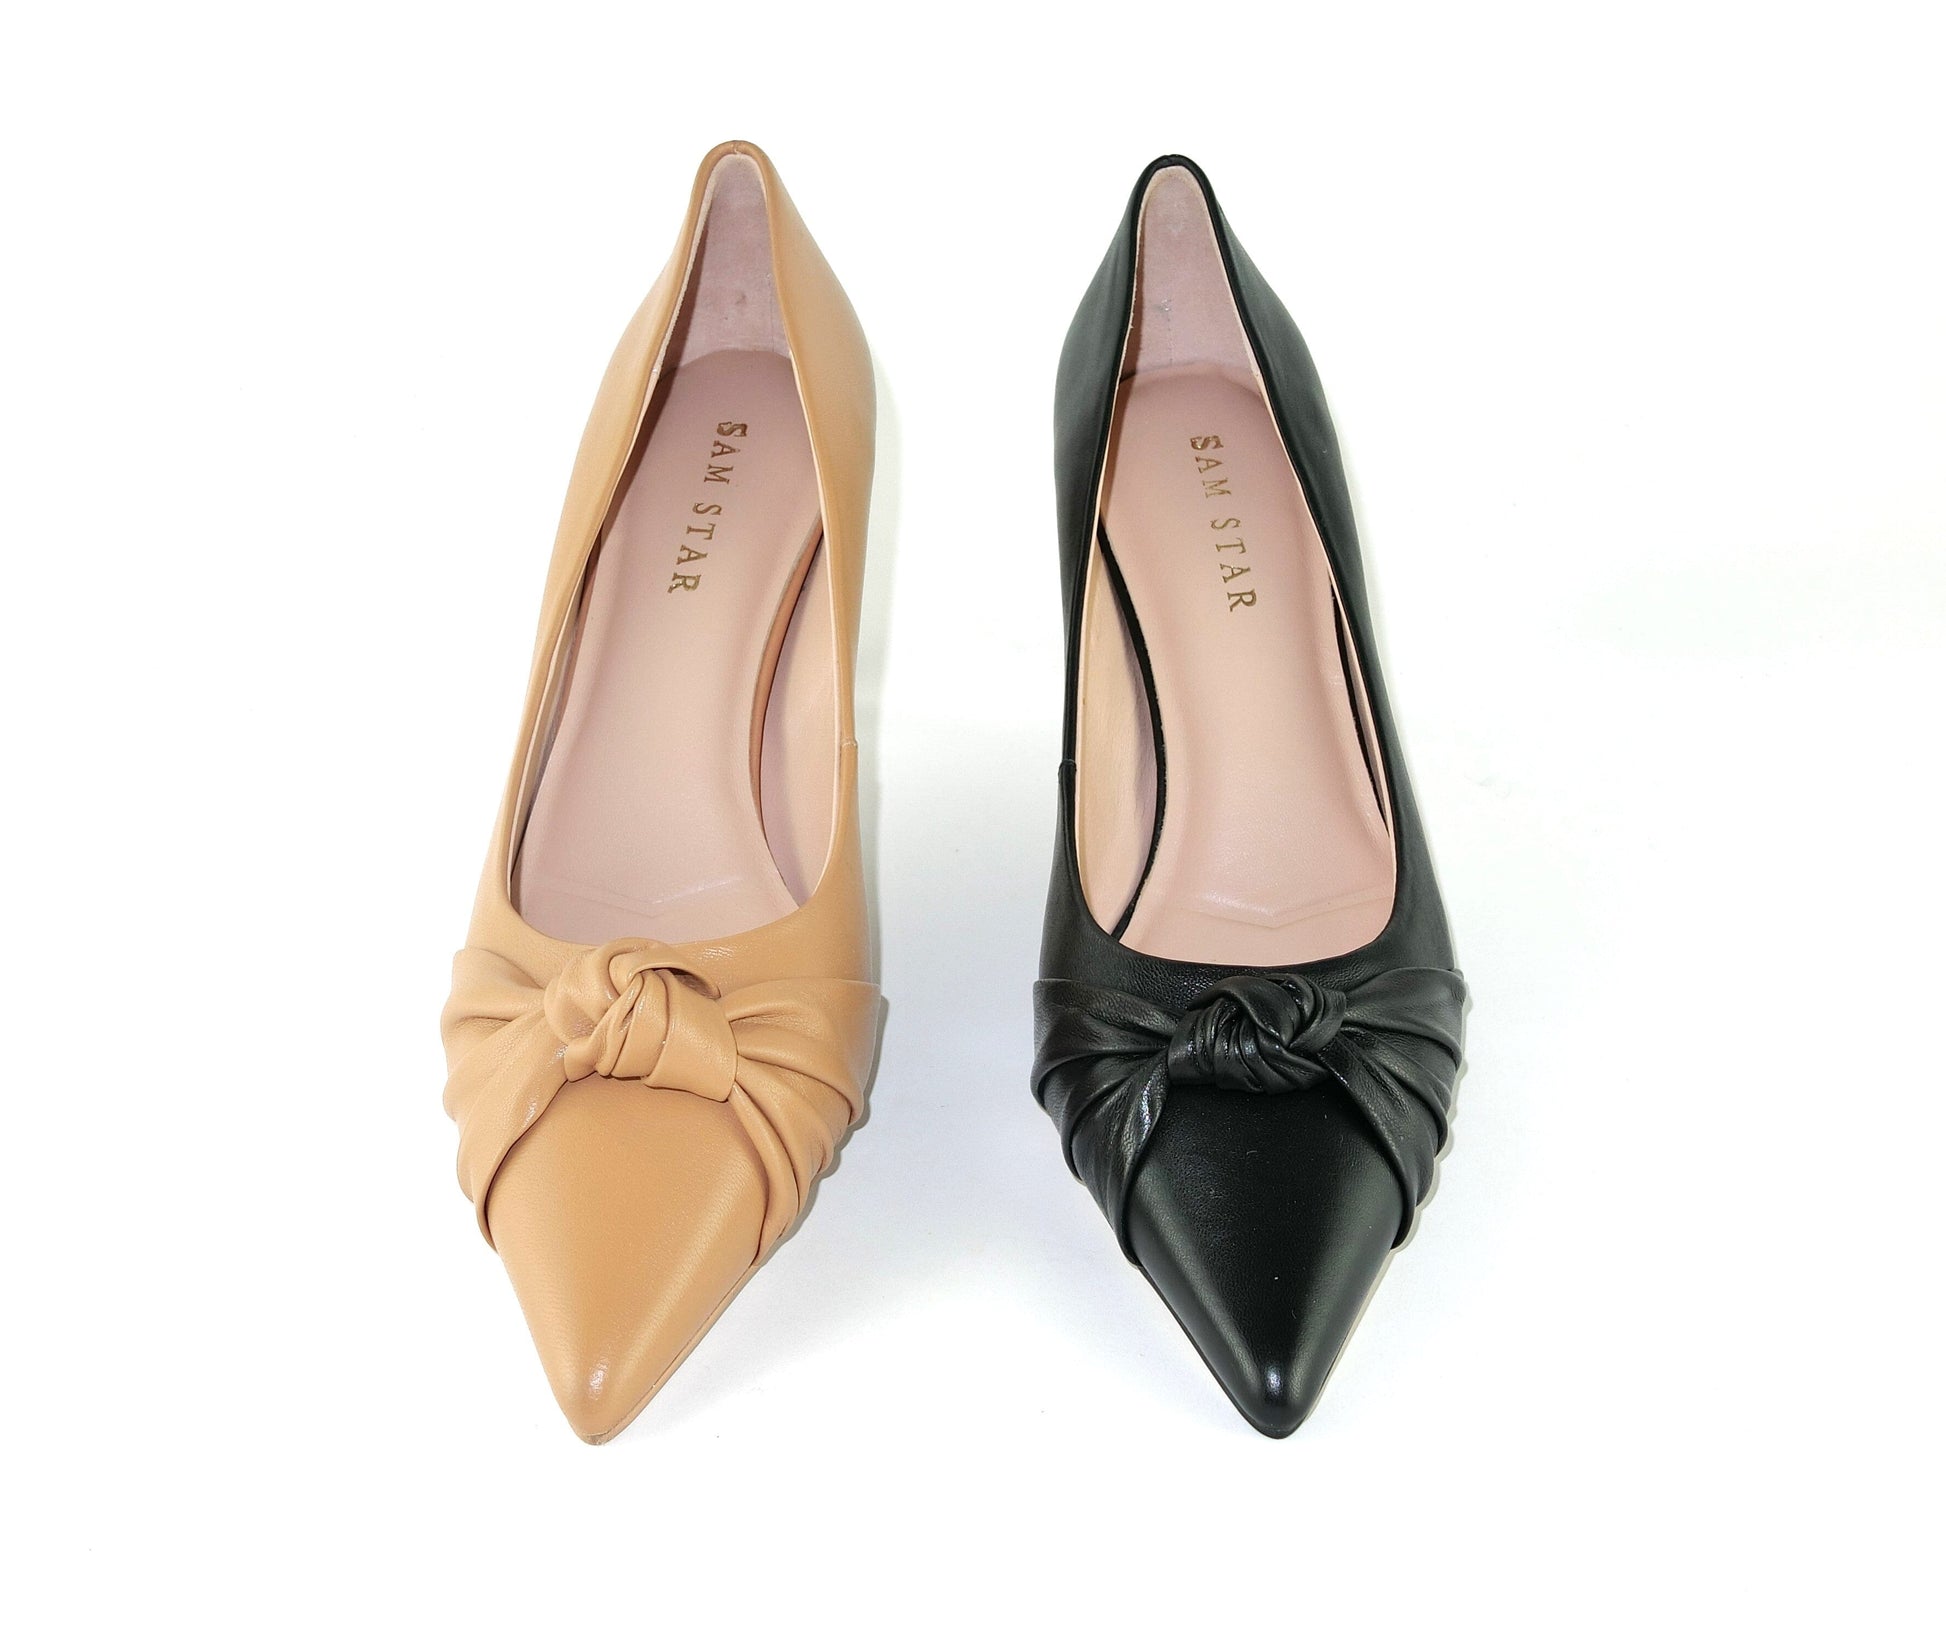 SS23004 Leather court shoes with knot design - Black and Tan ladies shoes Sam Star shoes 